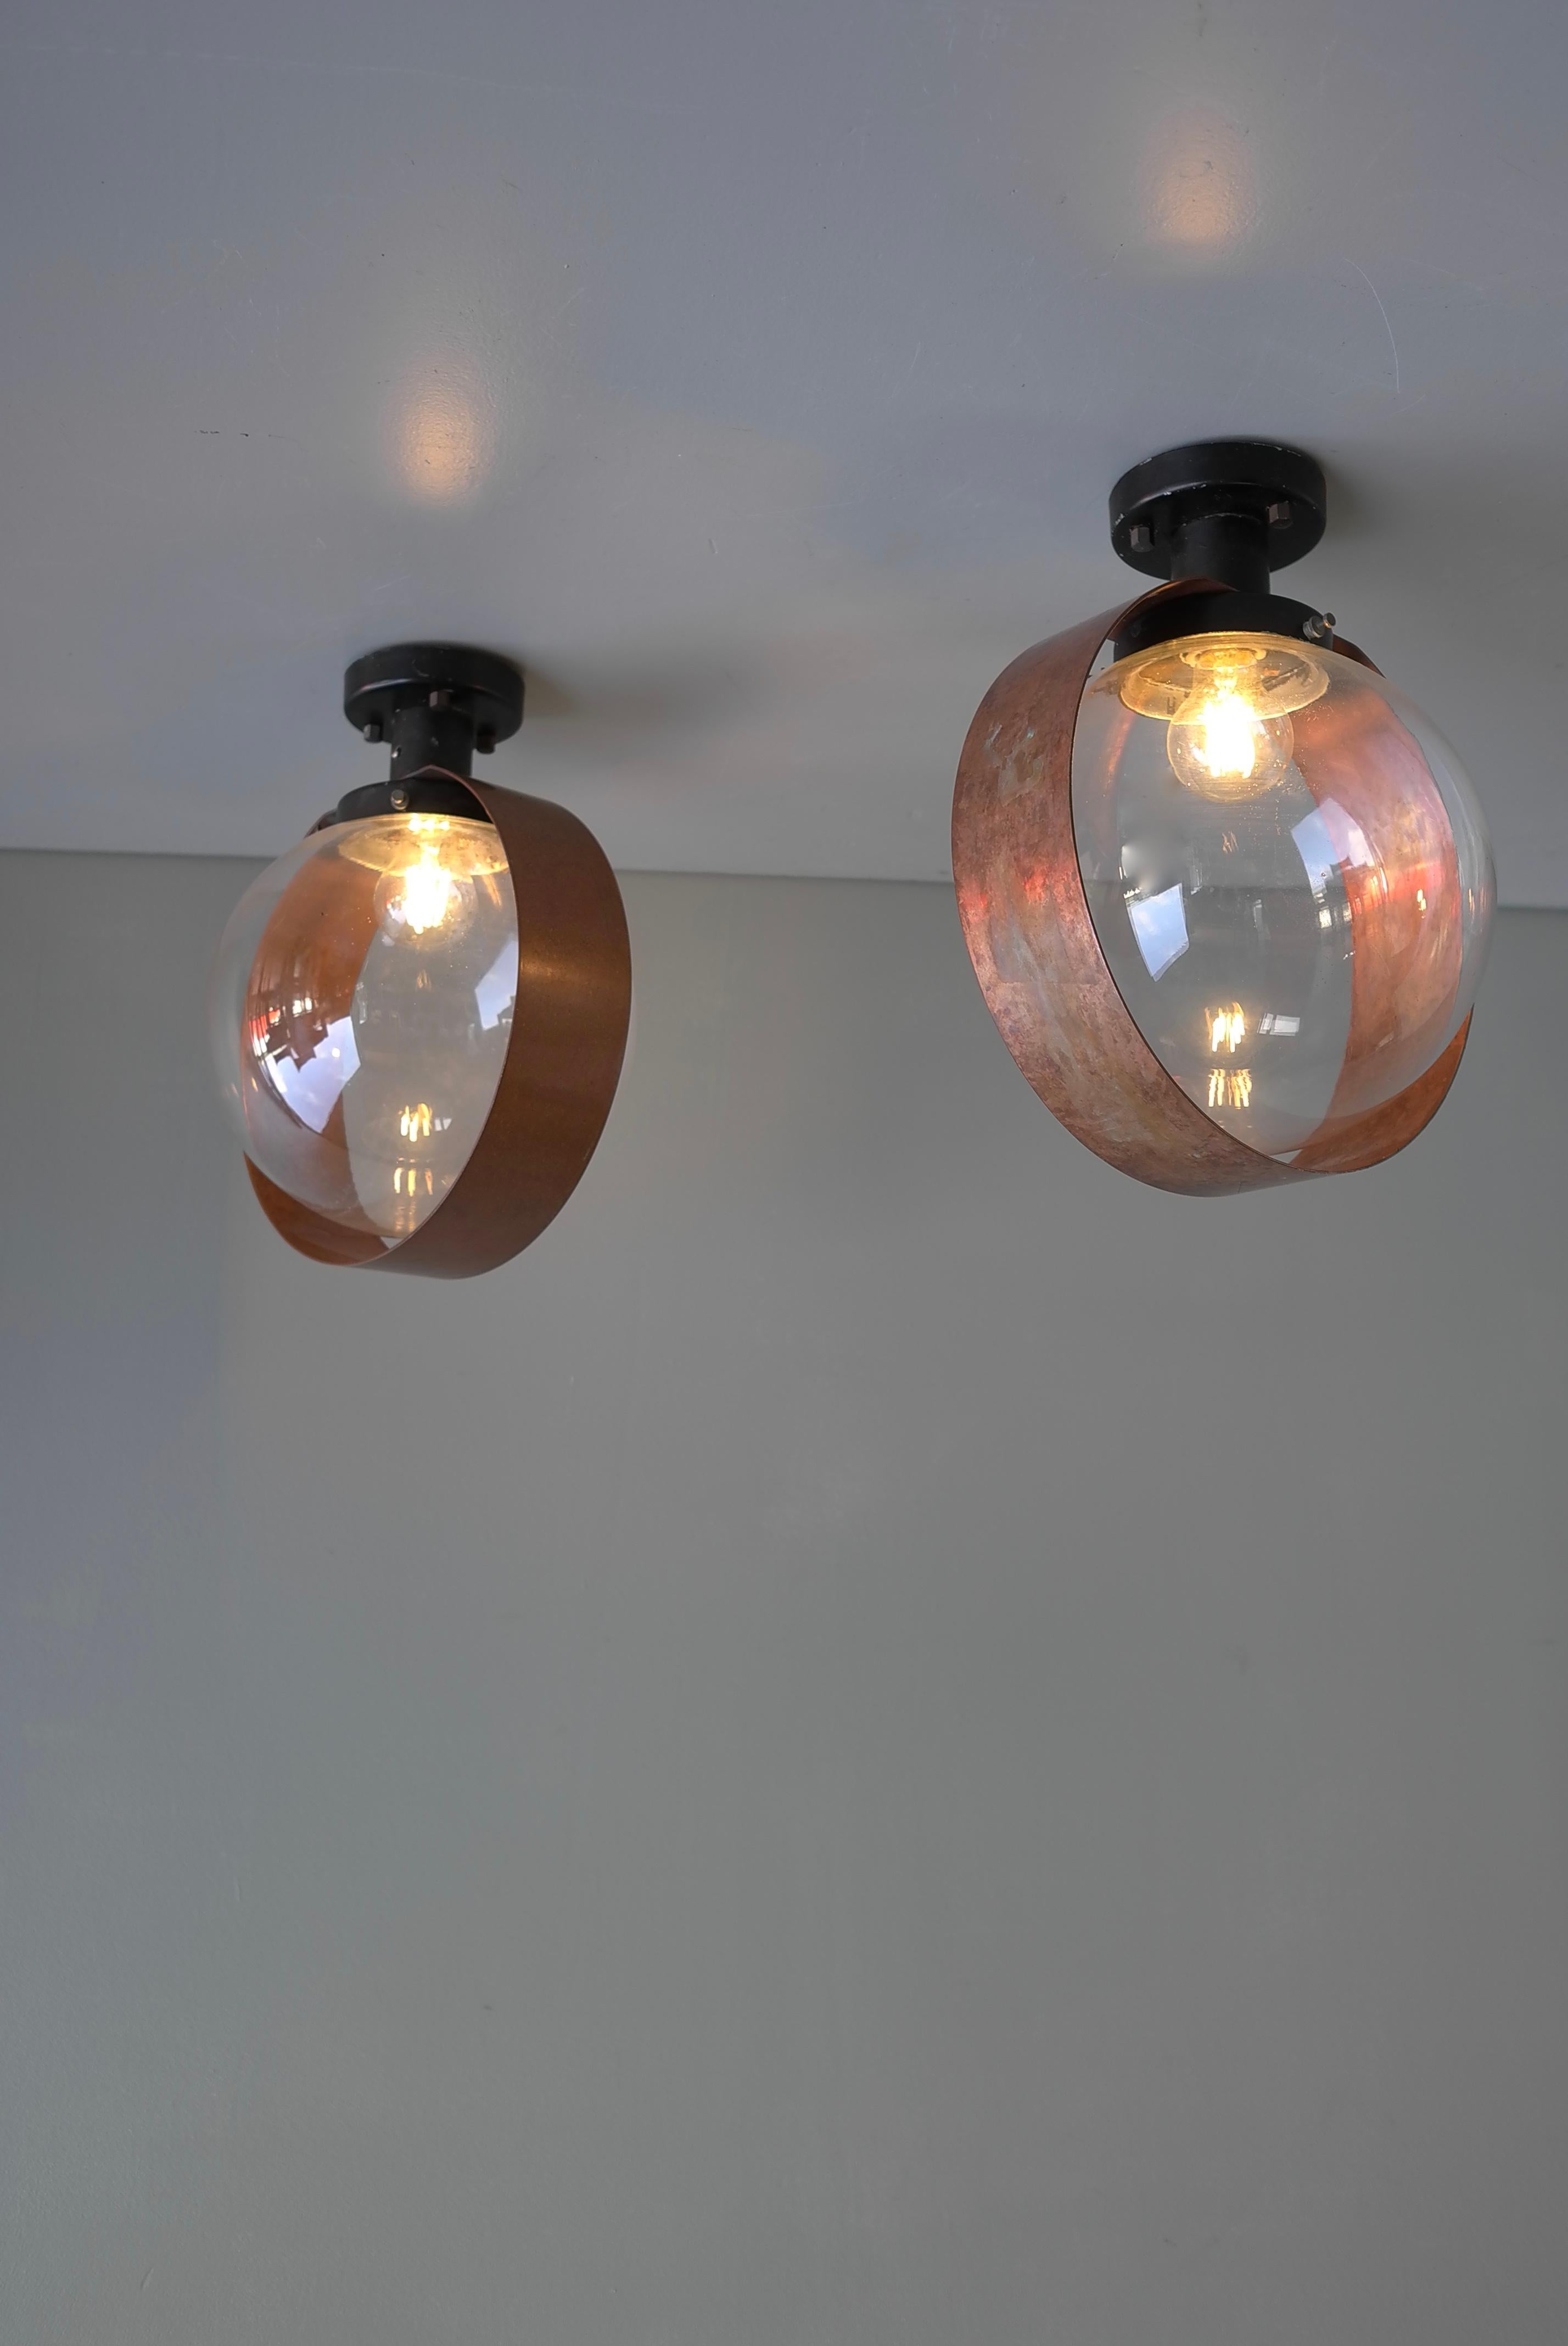 Mid-20th Century Pair of Scandinavian Glass Ball Wall lamps with Copper Patina Rims, 1960's For Sale